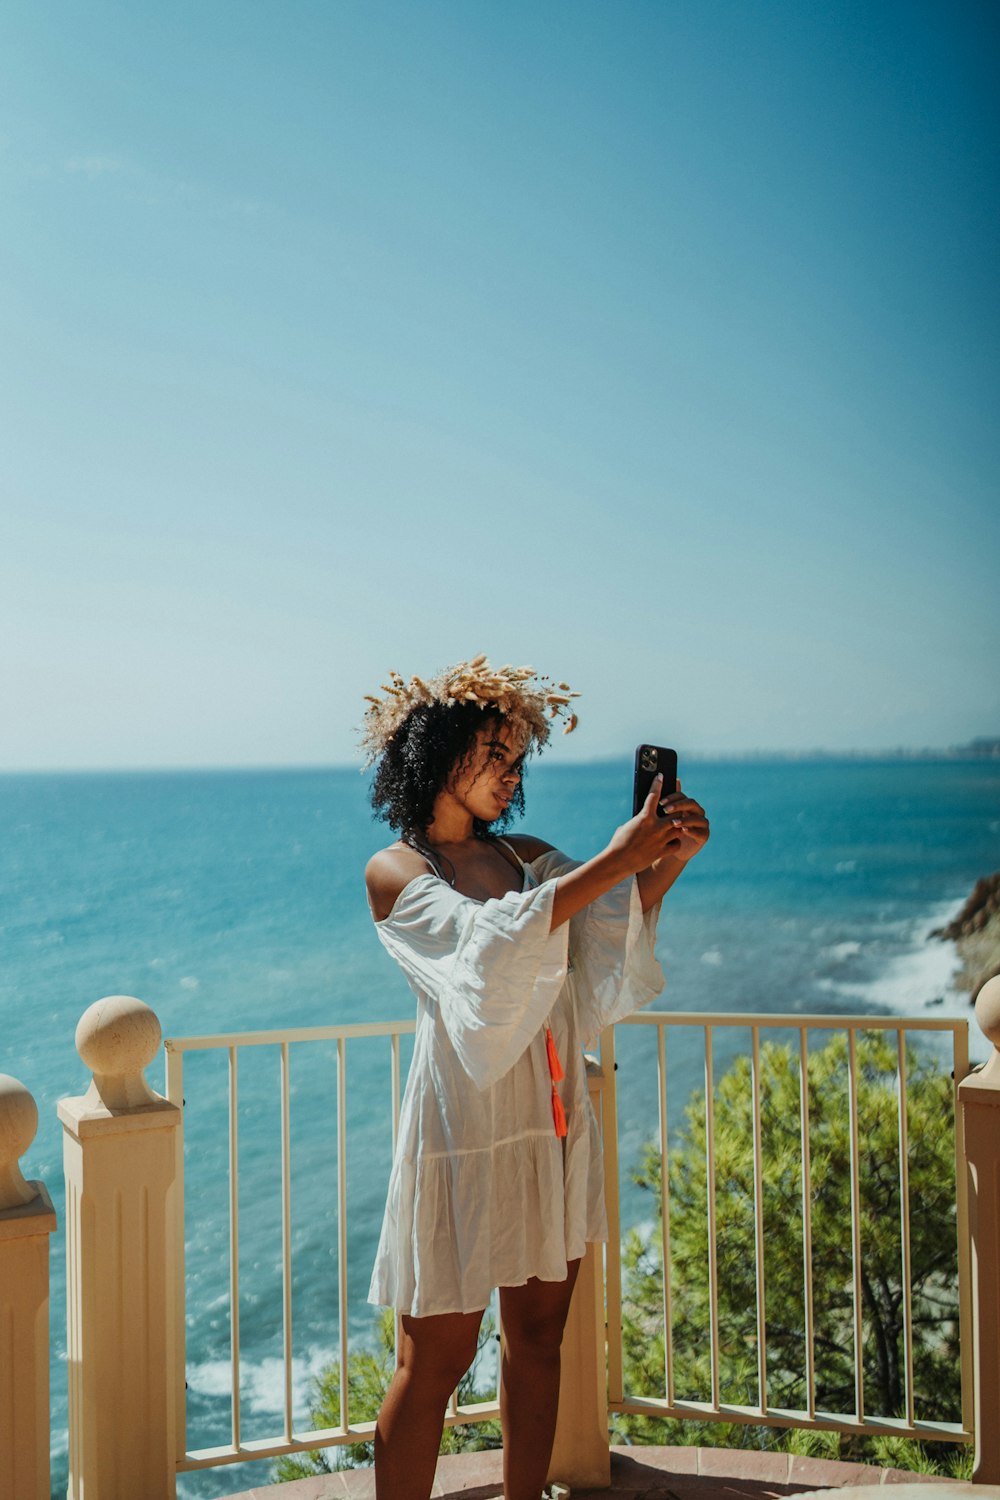 a woman taking a picture of the ocean with her cell phone